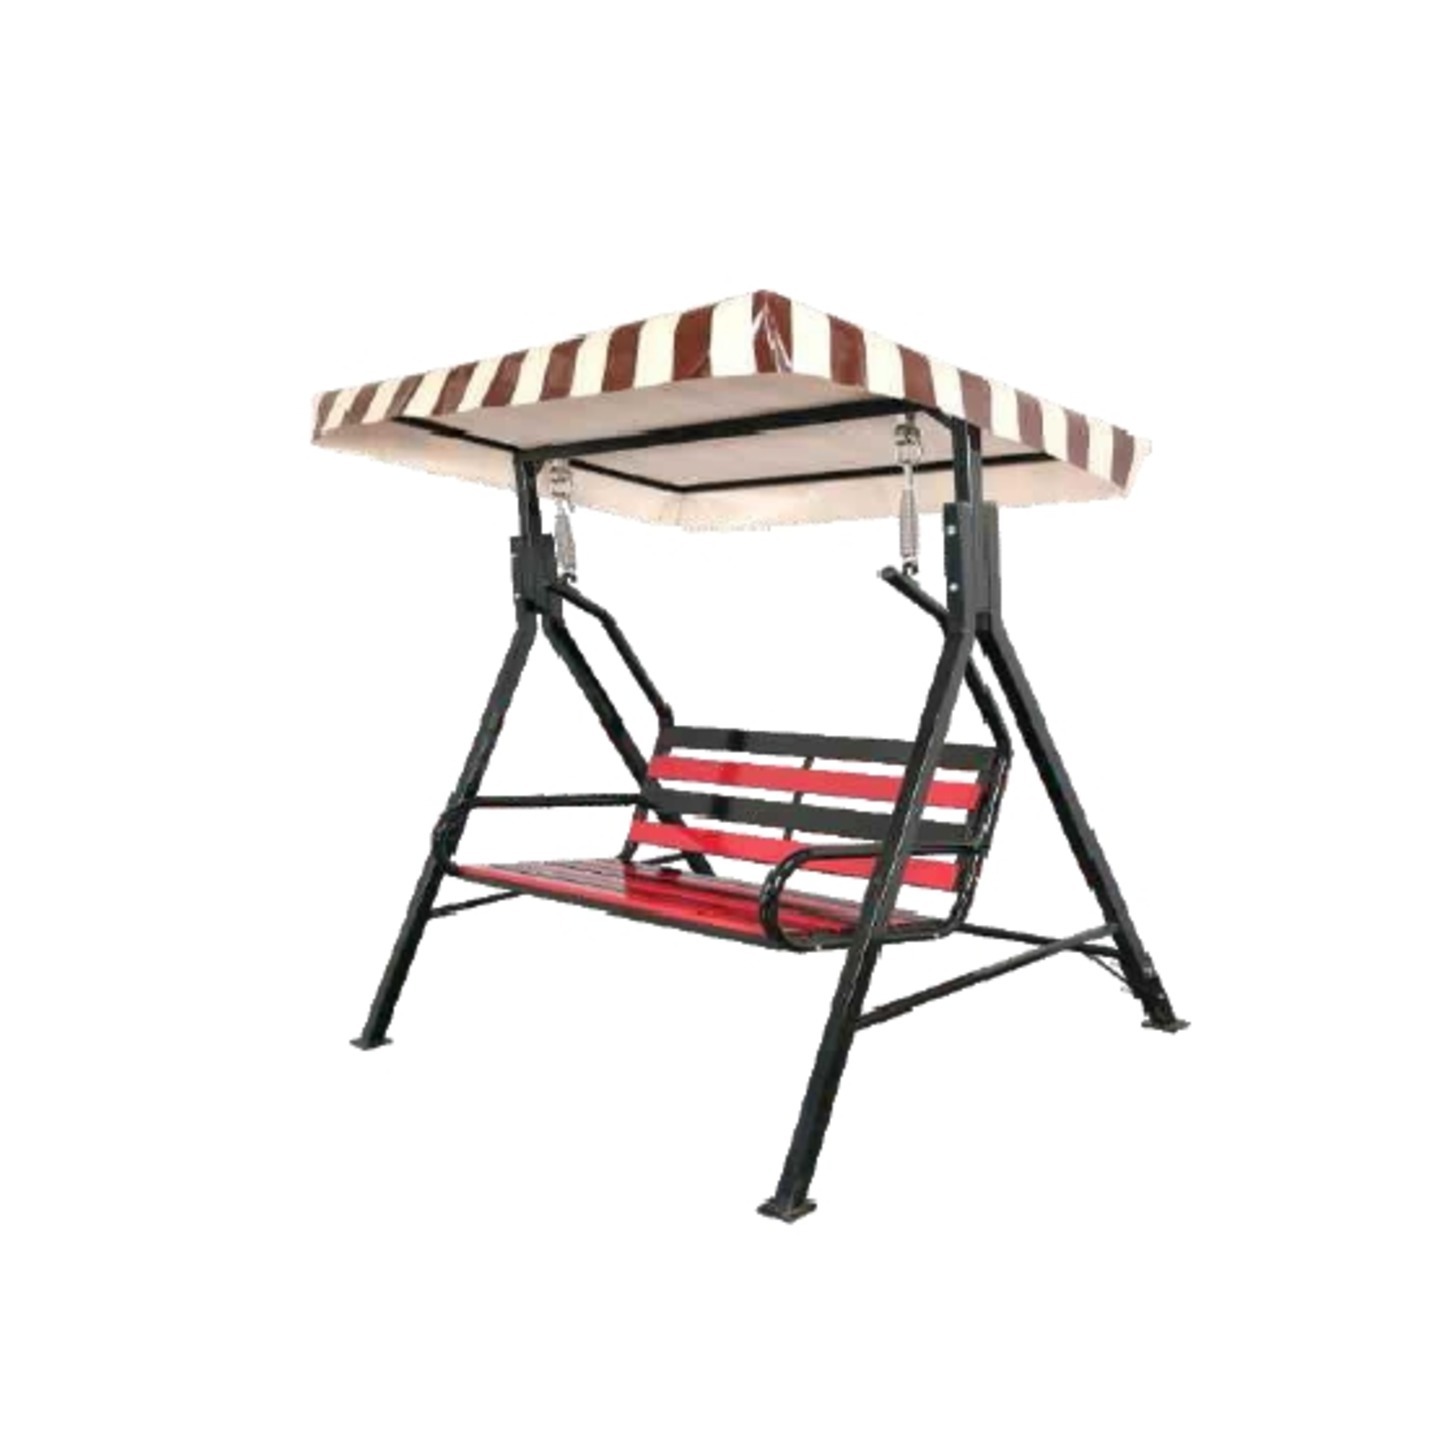 HJA Swing With Stand Roof HOJ-027 In Red & Black Colour